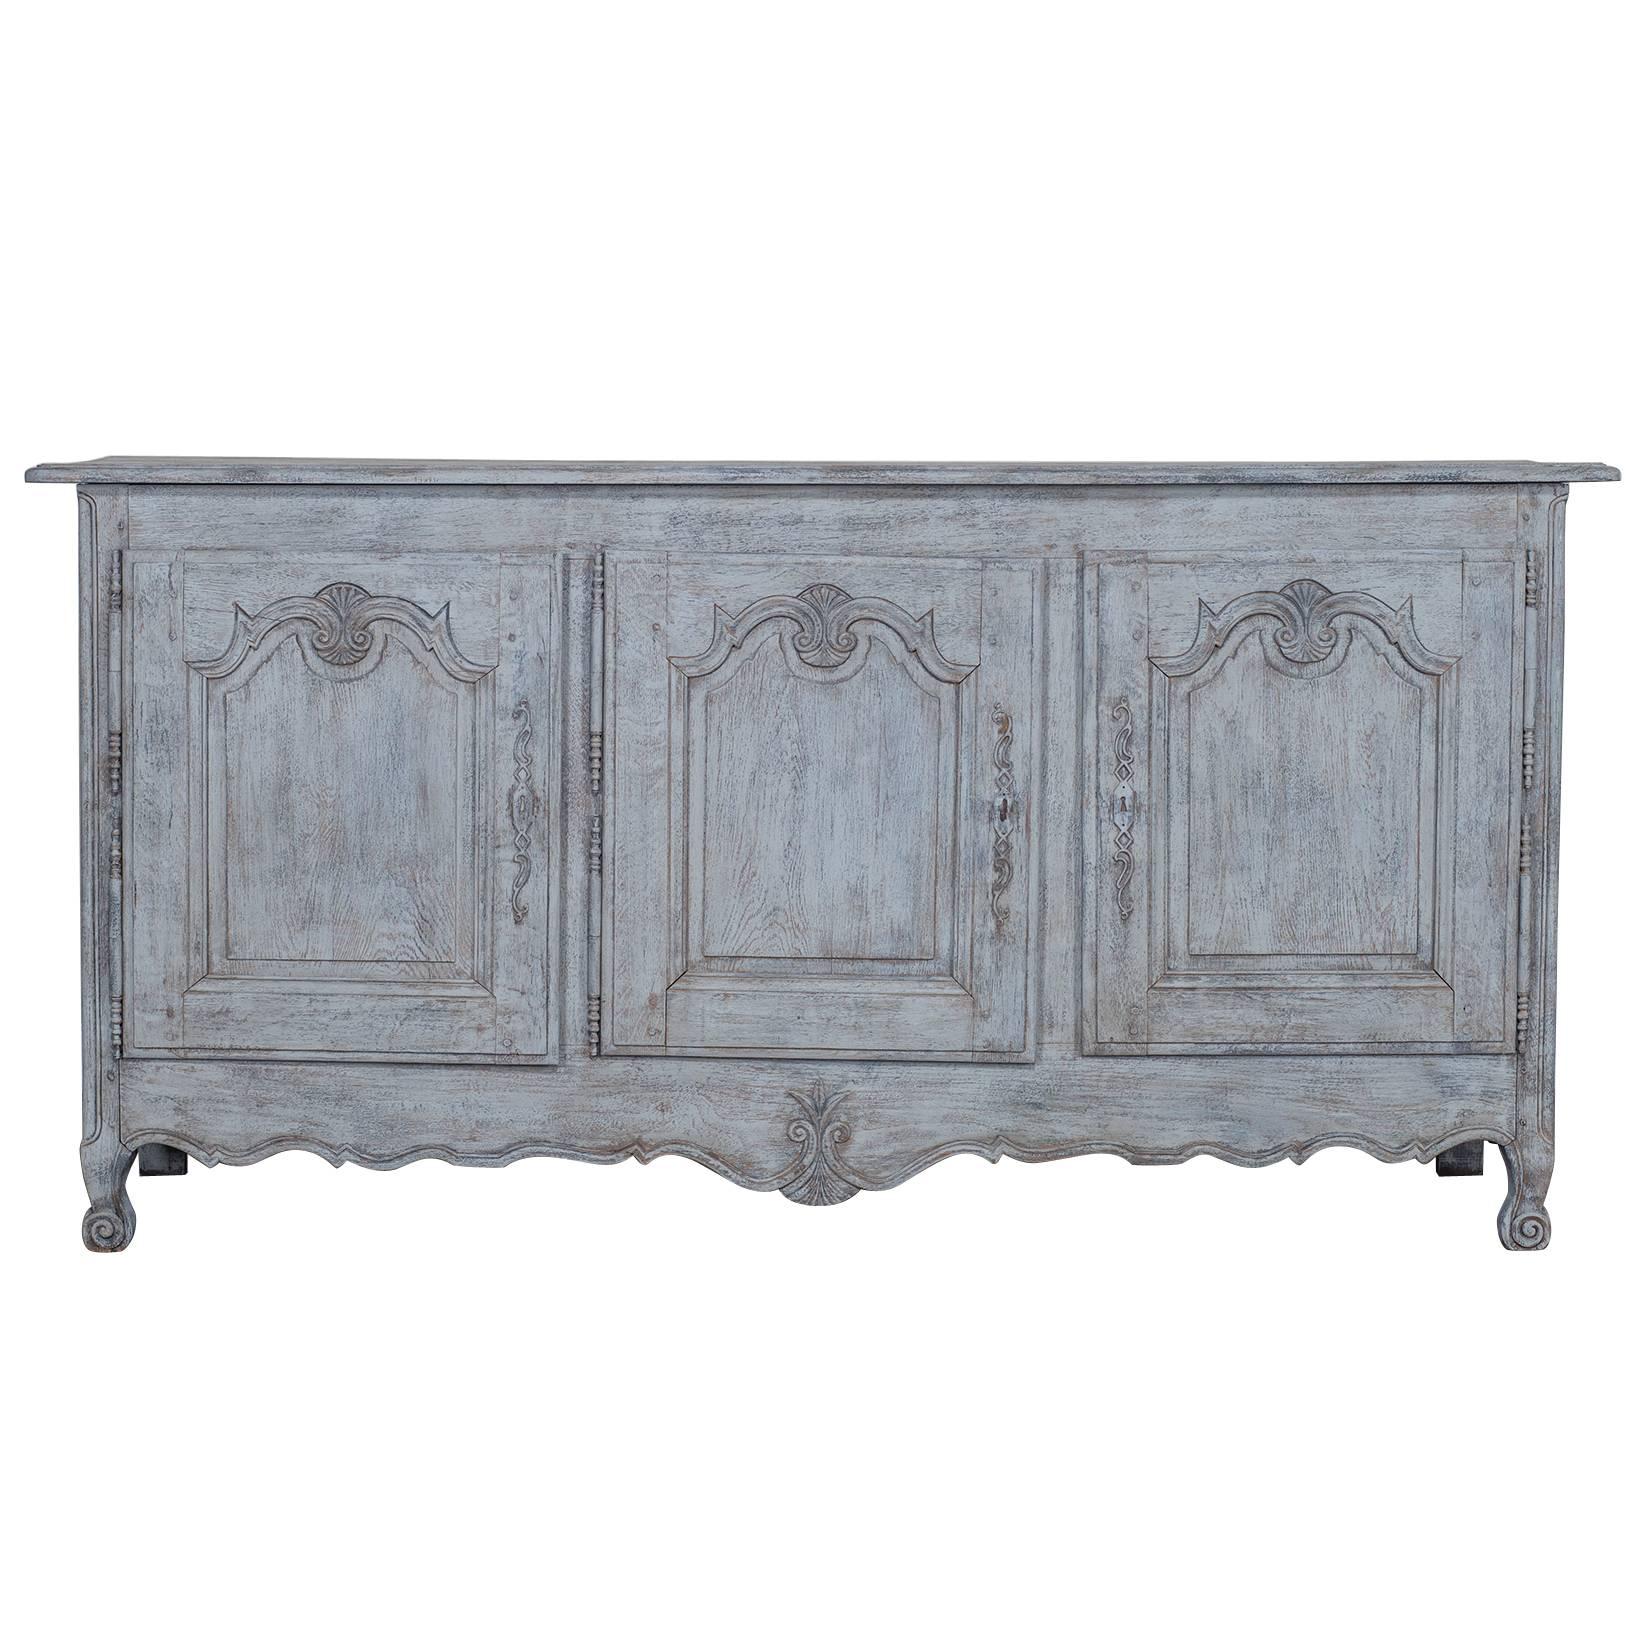 Antique French Louis XV Style Painted Oak Buffet, Enfilade, circa 1850